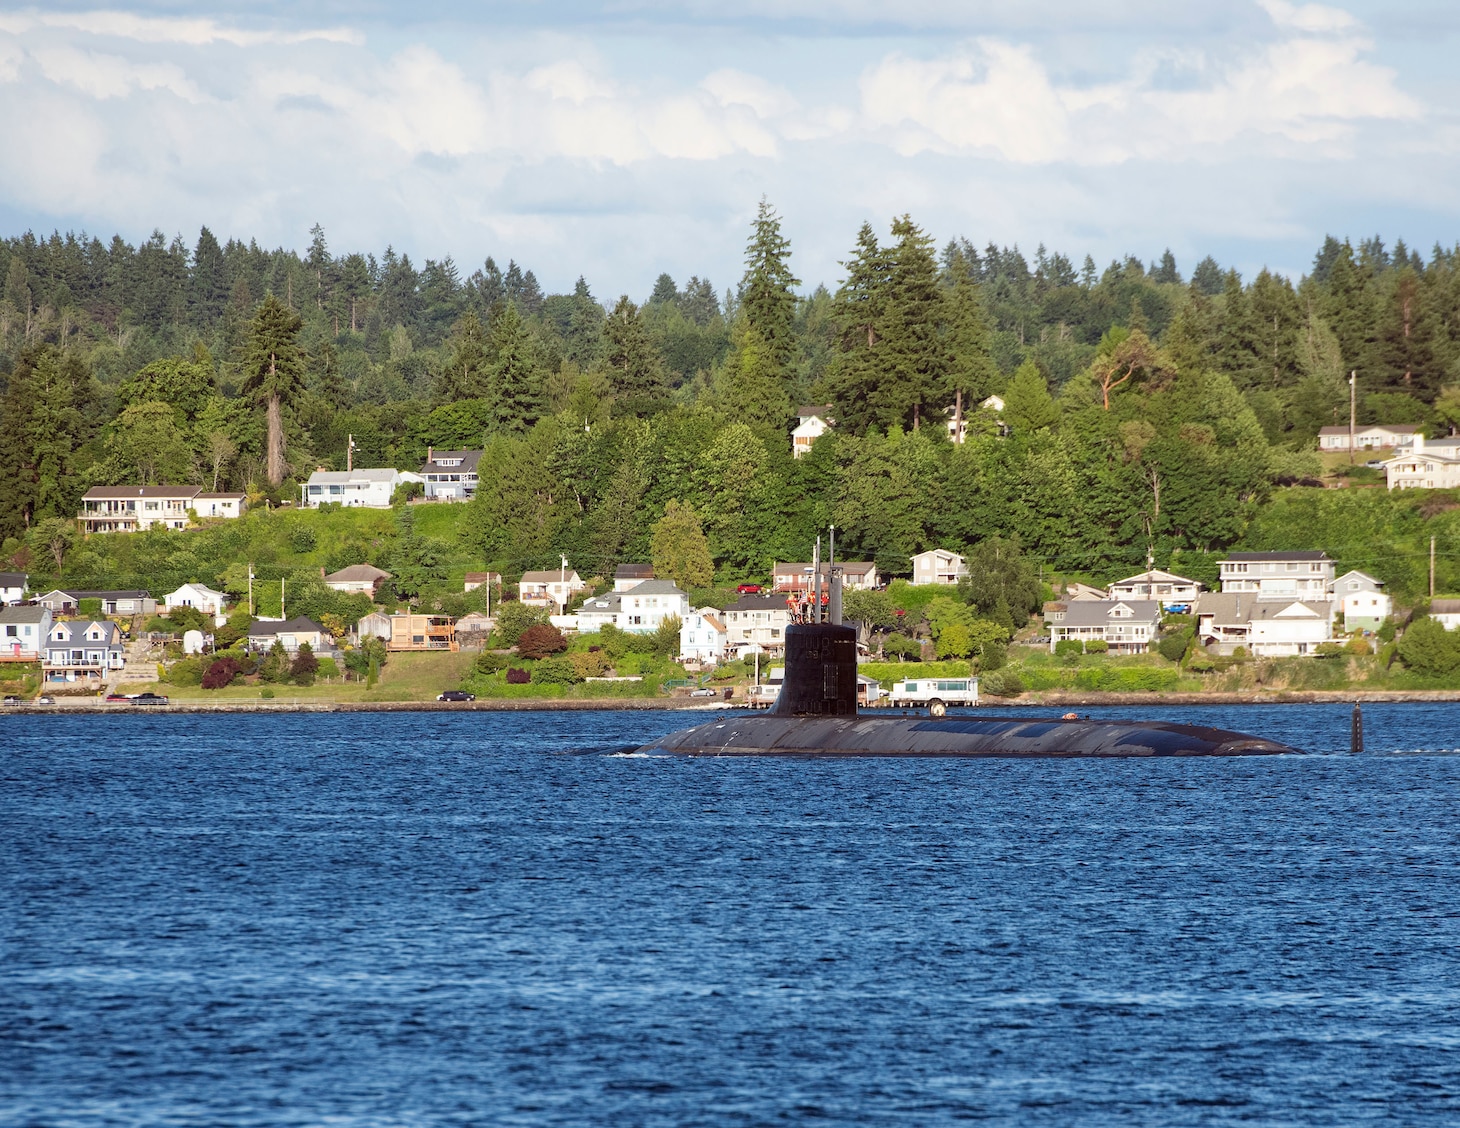 BREMERTON, Wash. – The Seawolf-class fast-attack submarine USS Seawolf (SSN 21) departs Naval Base Kitsap-Bremerton, June 9. U.S. military forces are present and active in and around the Pacific in support of allies and partners and a free and open Indo-Pacific for more than 75 years. (U.S. Navy Photo by Lt. Mack Jamieson/Released)